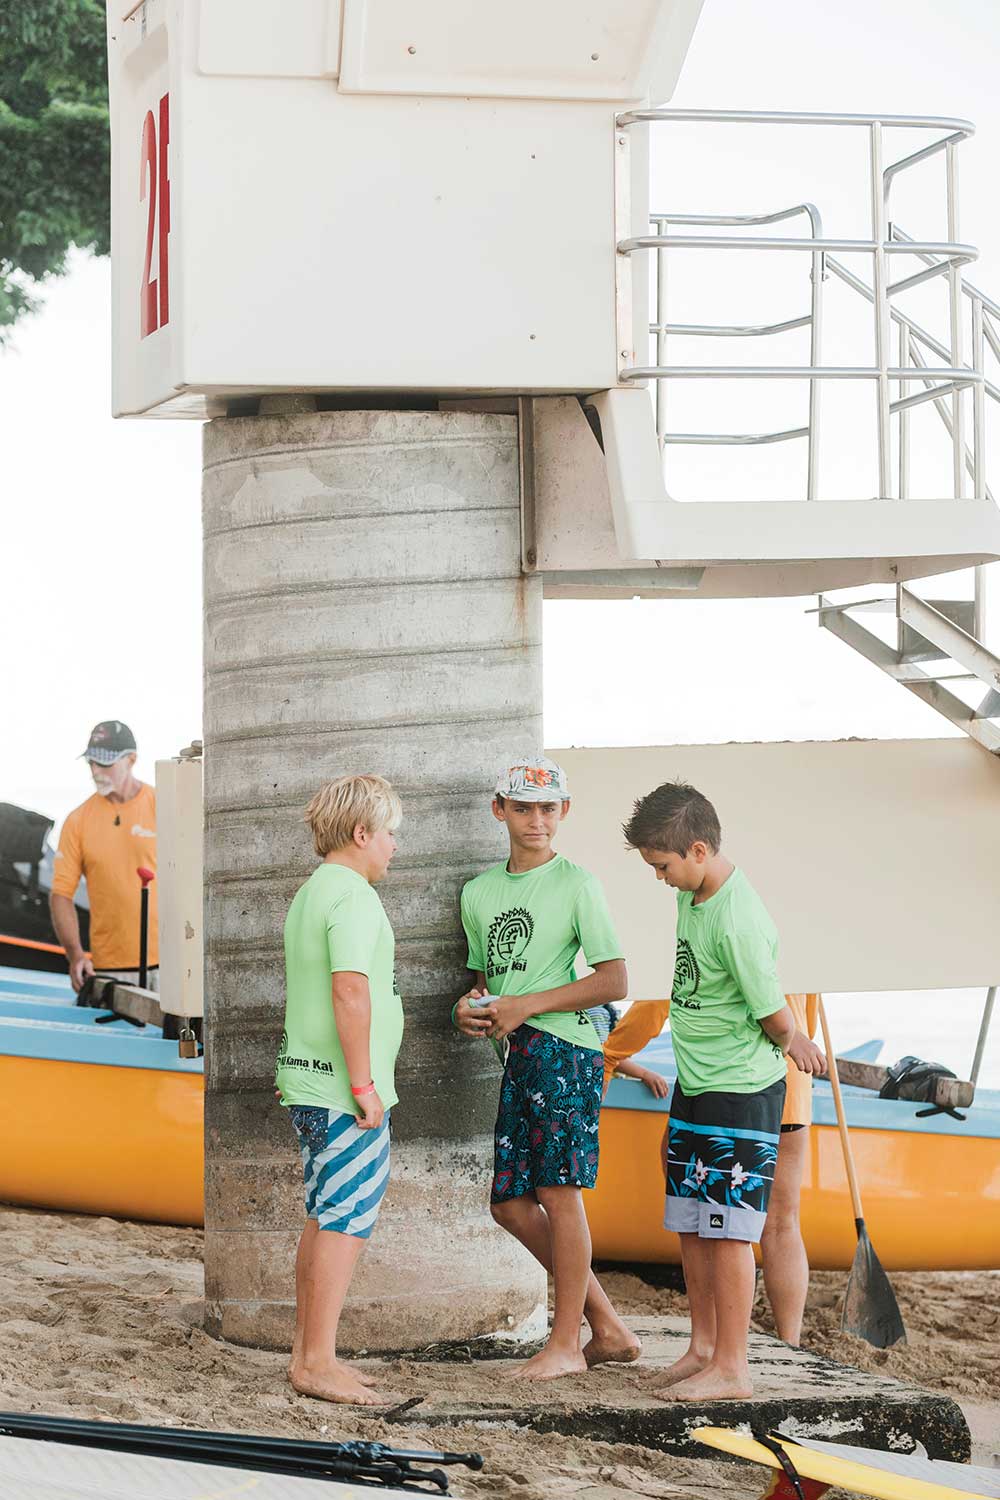 Three little boys in green shirts and board shorts stand by a life guard station